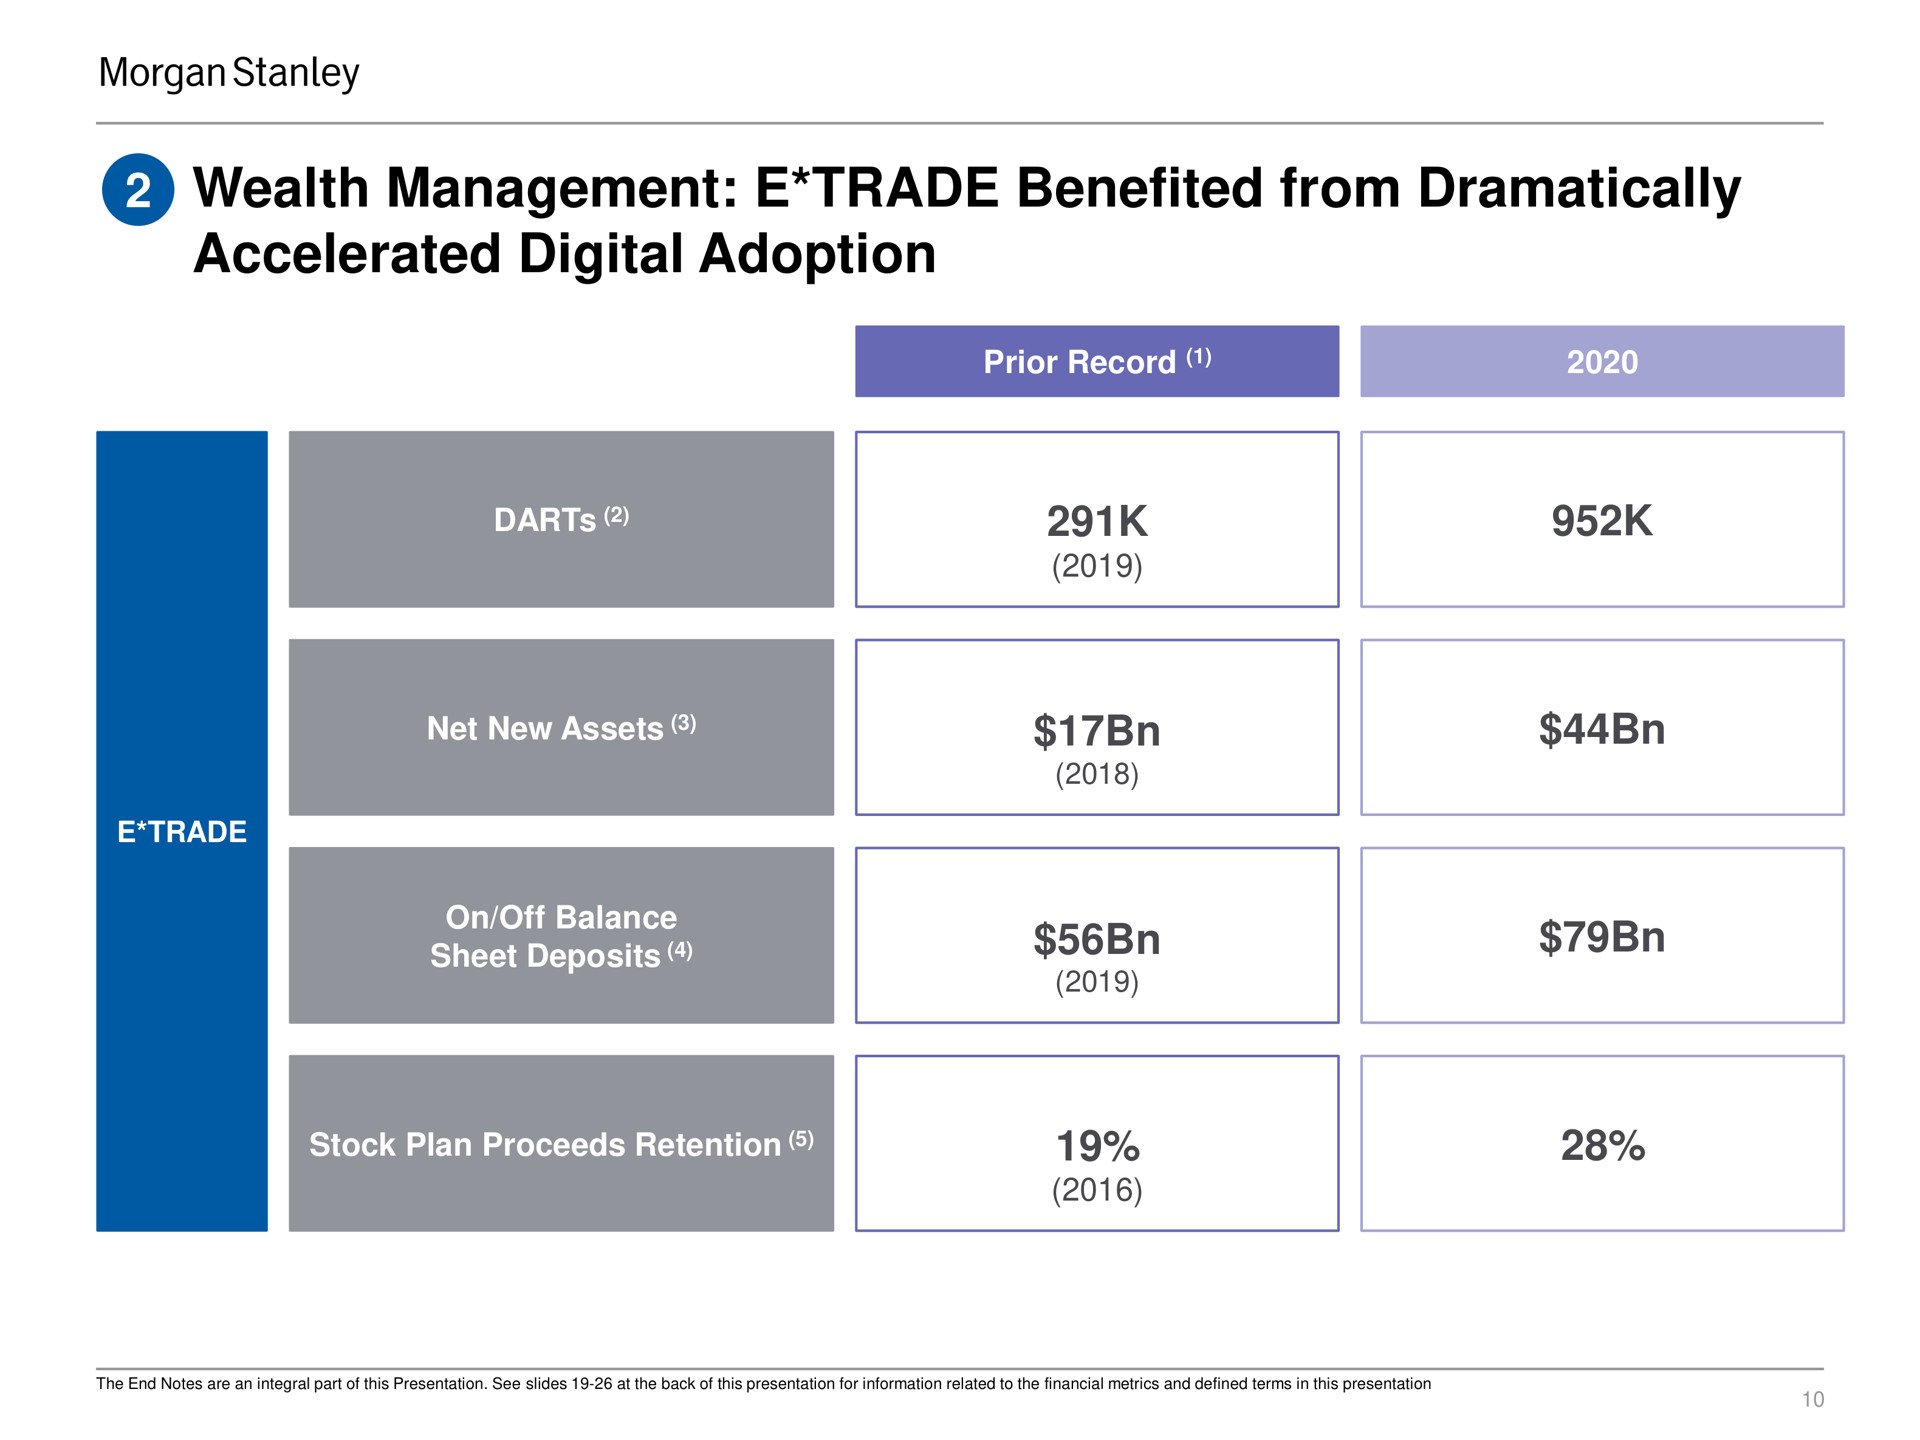 wealth management trade benefited from dramatically accelerated digital adoption | Morgan Stanley